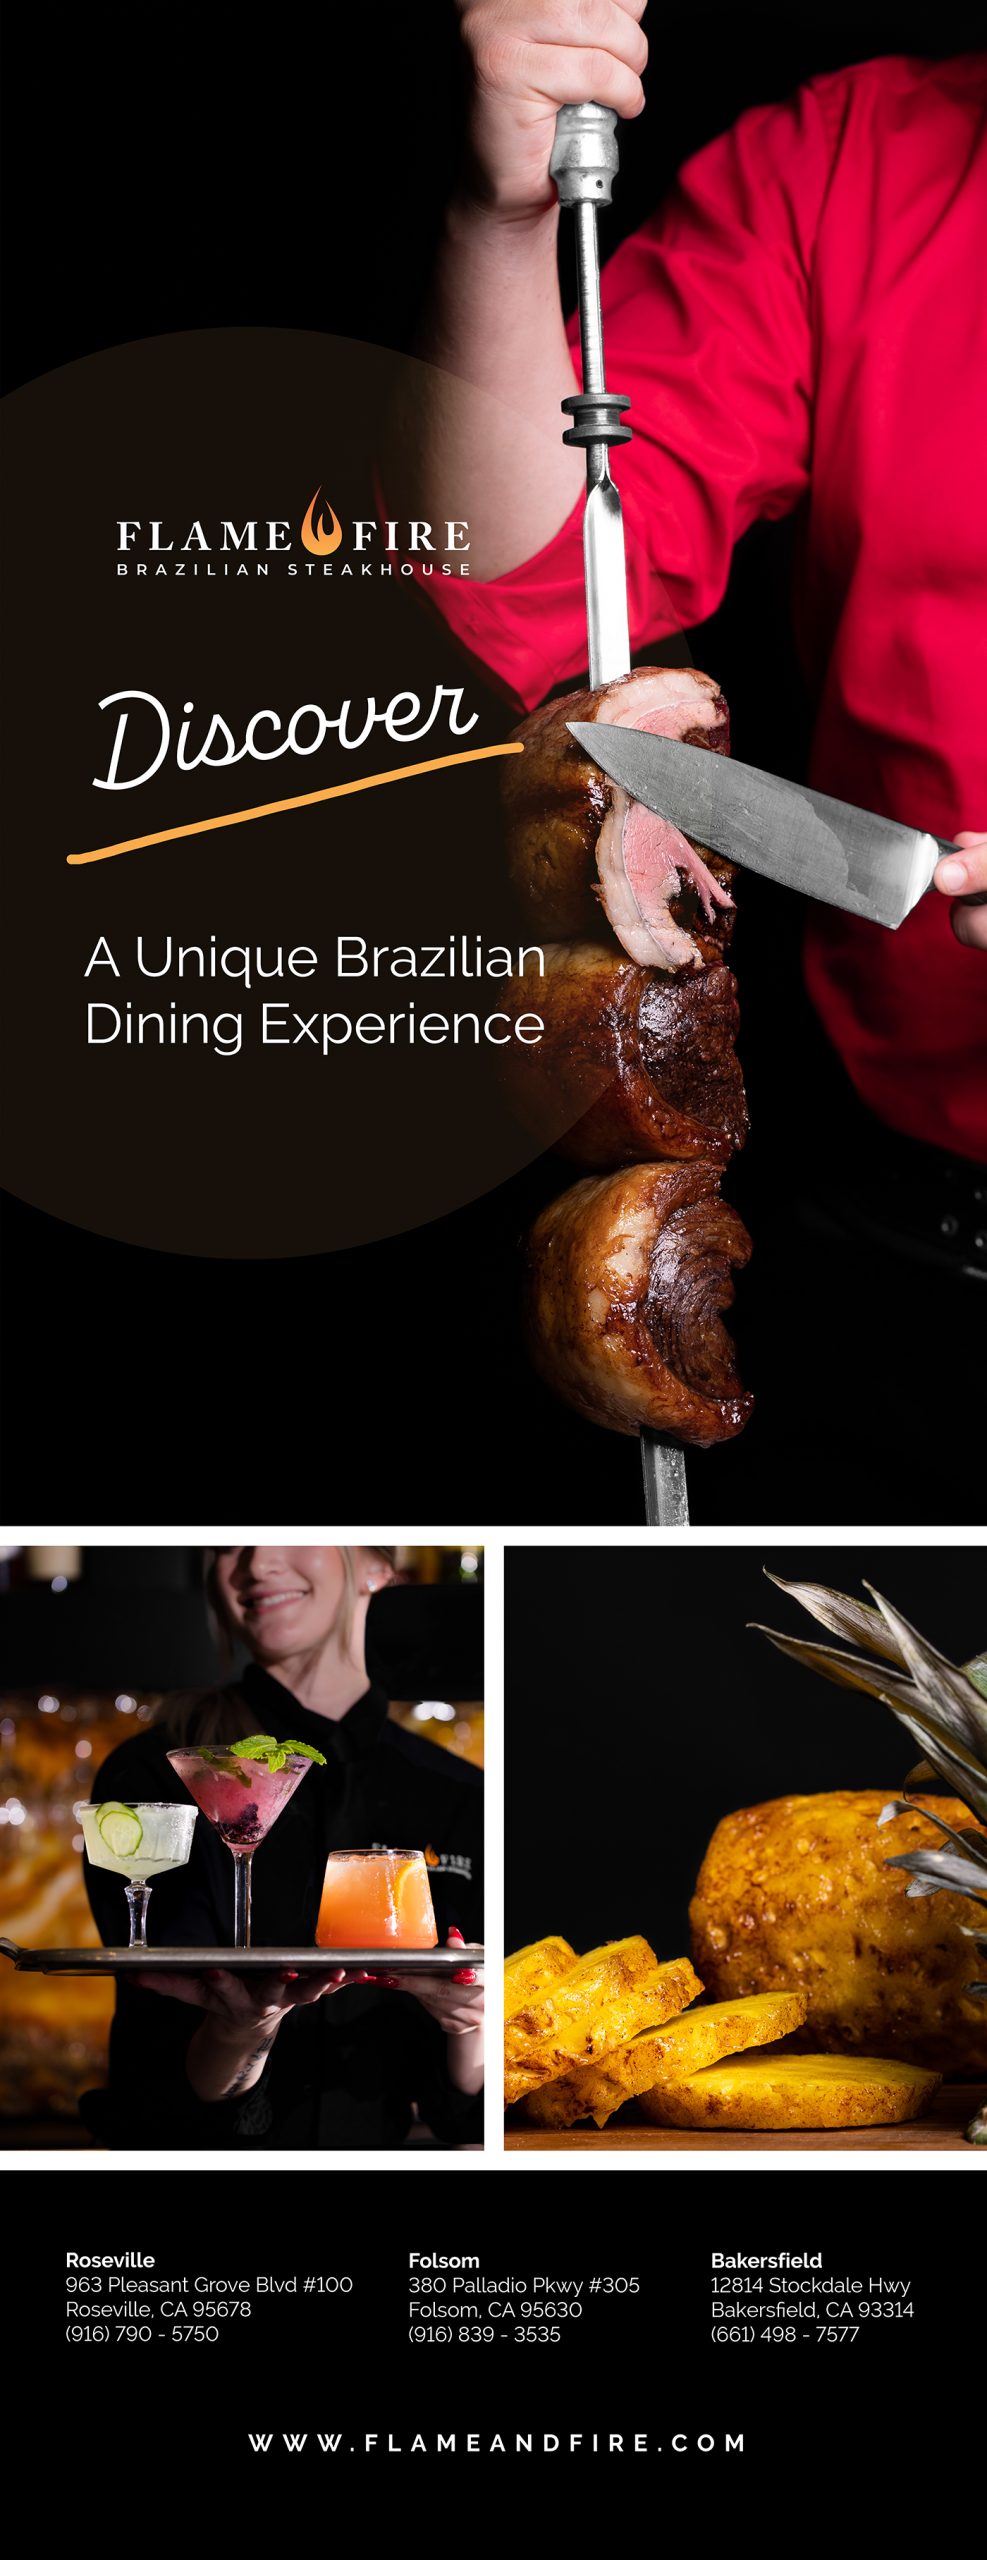 Flame and Fire Brazilian Steak House standing banner.